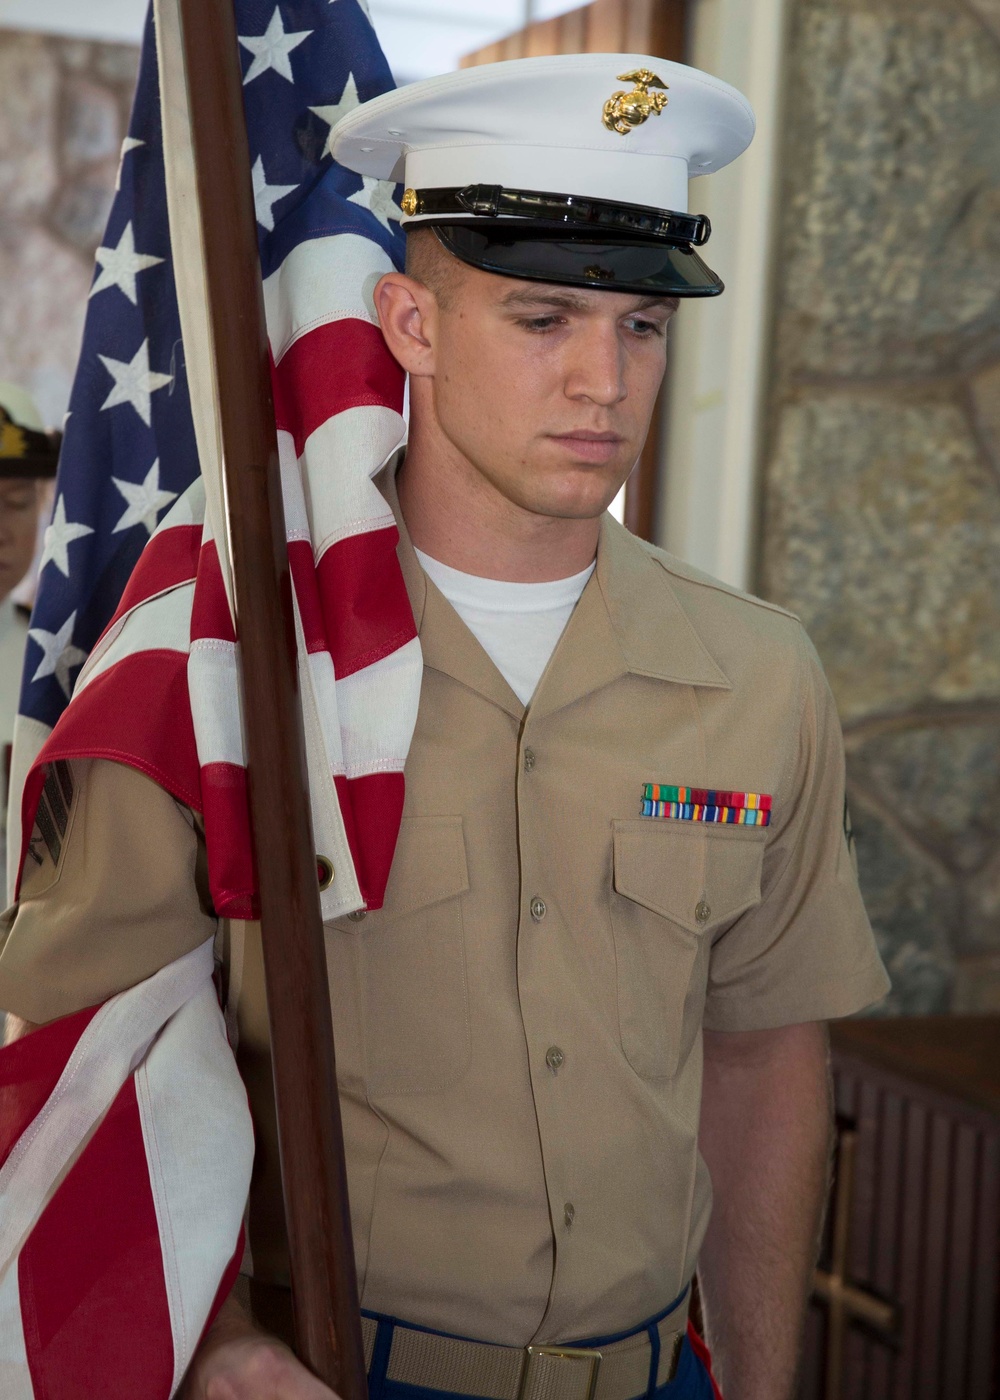 Marines, Australians attend a ceremony to mark relocation of service flags